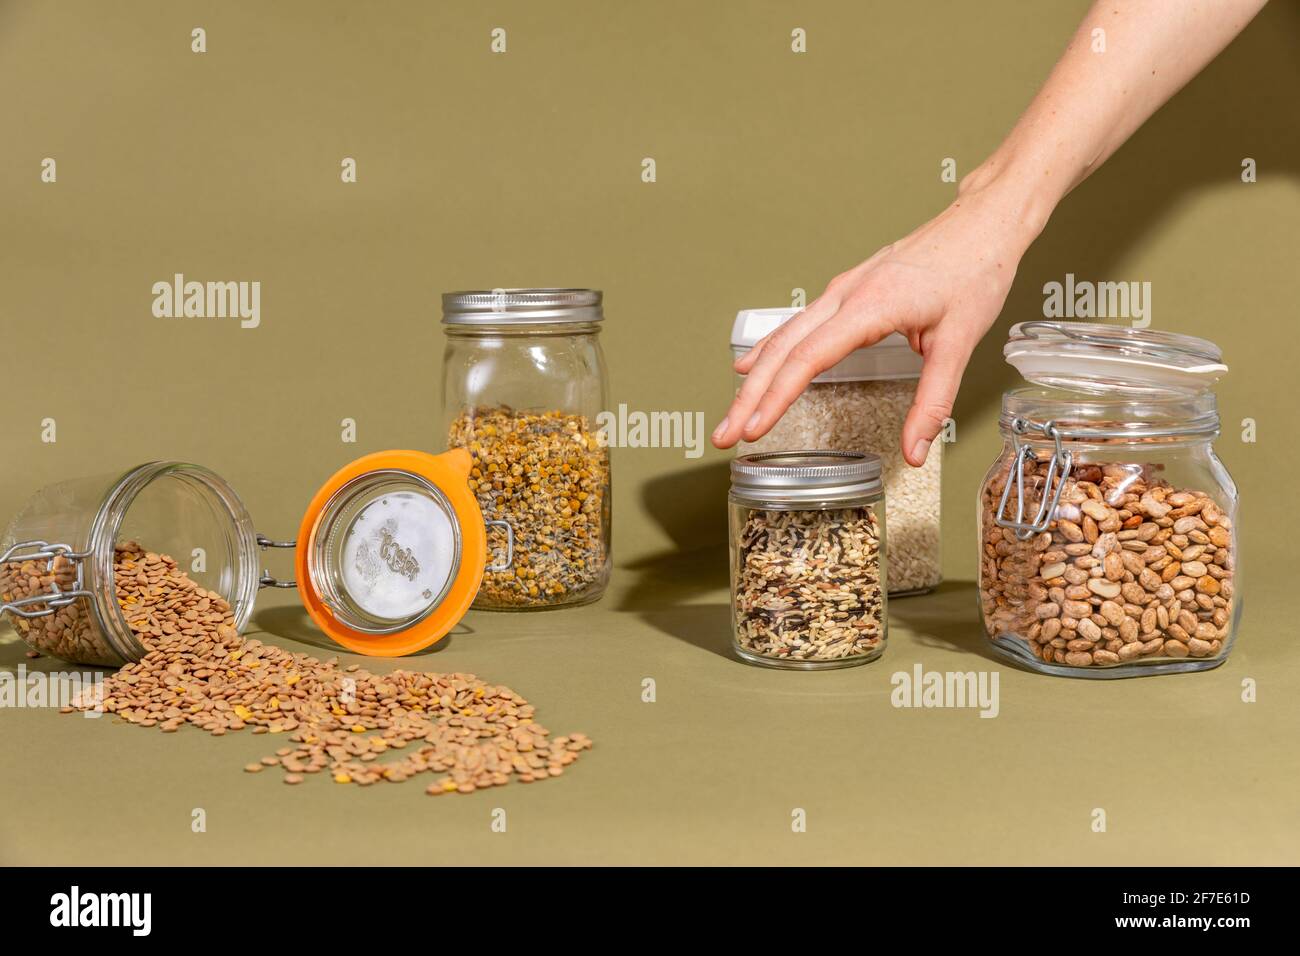 Still Life Scene of Various Pantry Items in Reuseable Containers Stock Photo